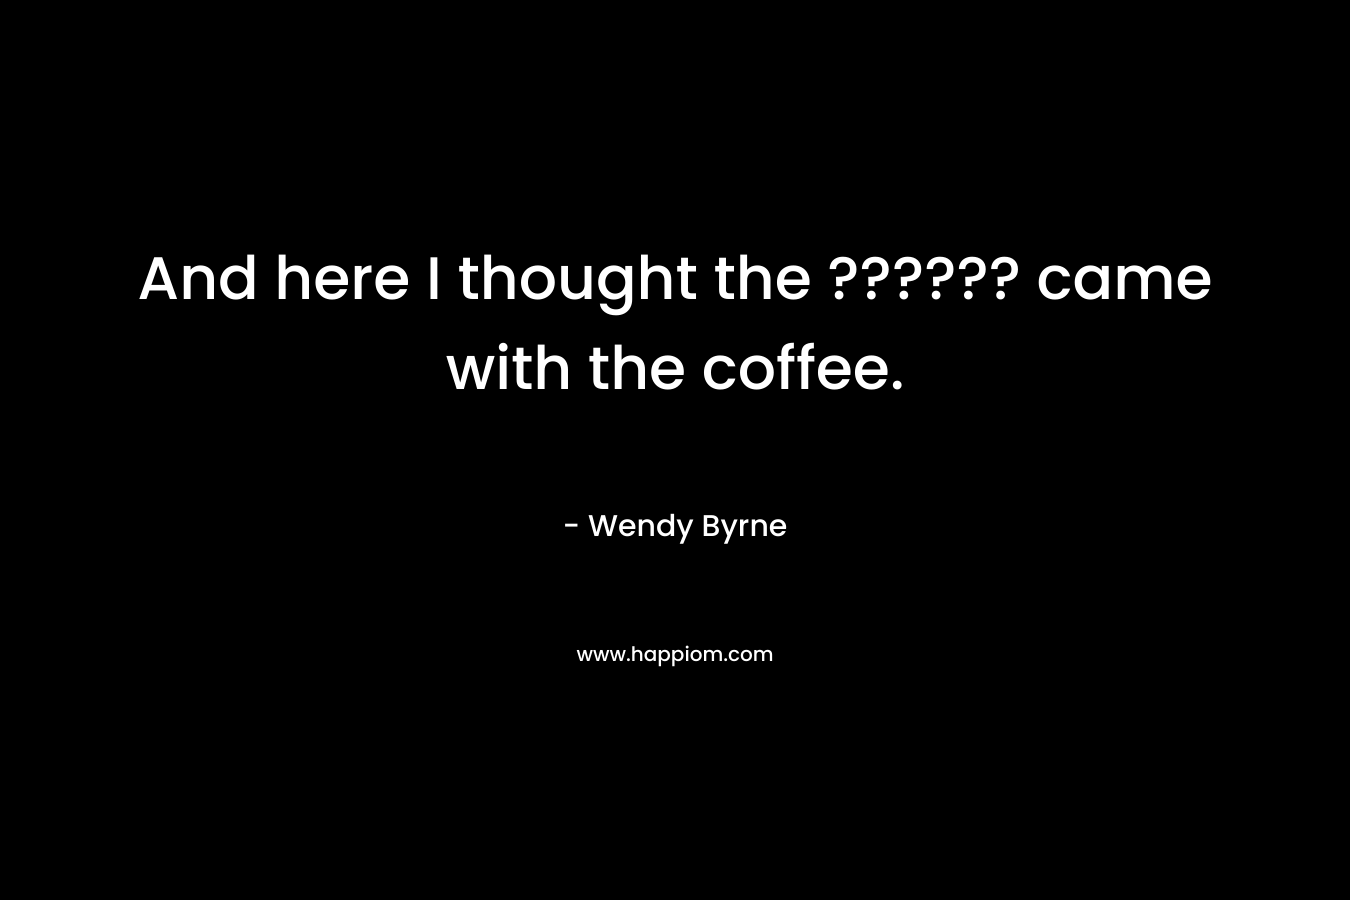 And here I thought the ?????? came with the coffee. – Wendy Byrne